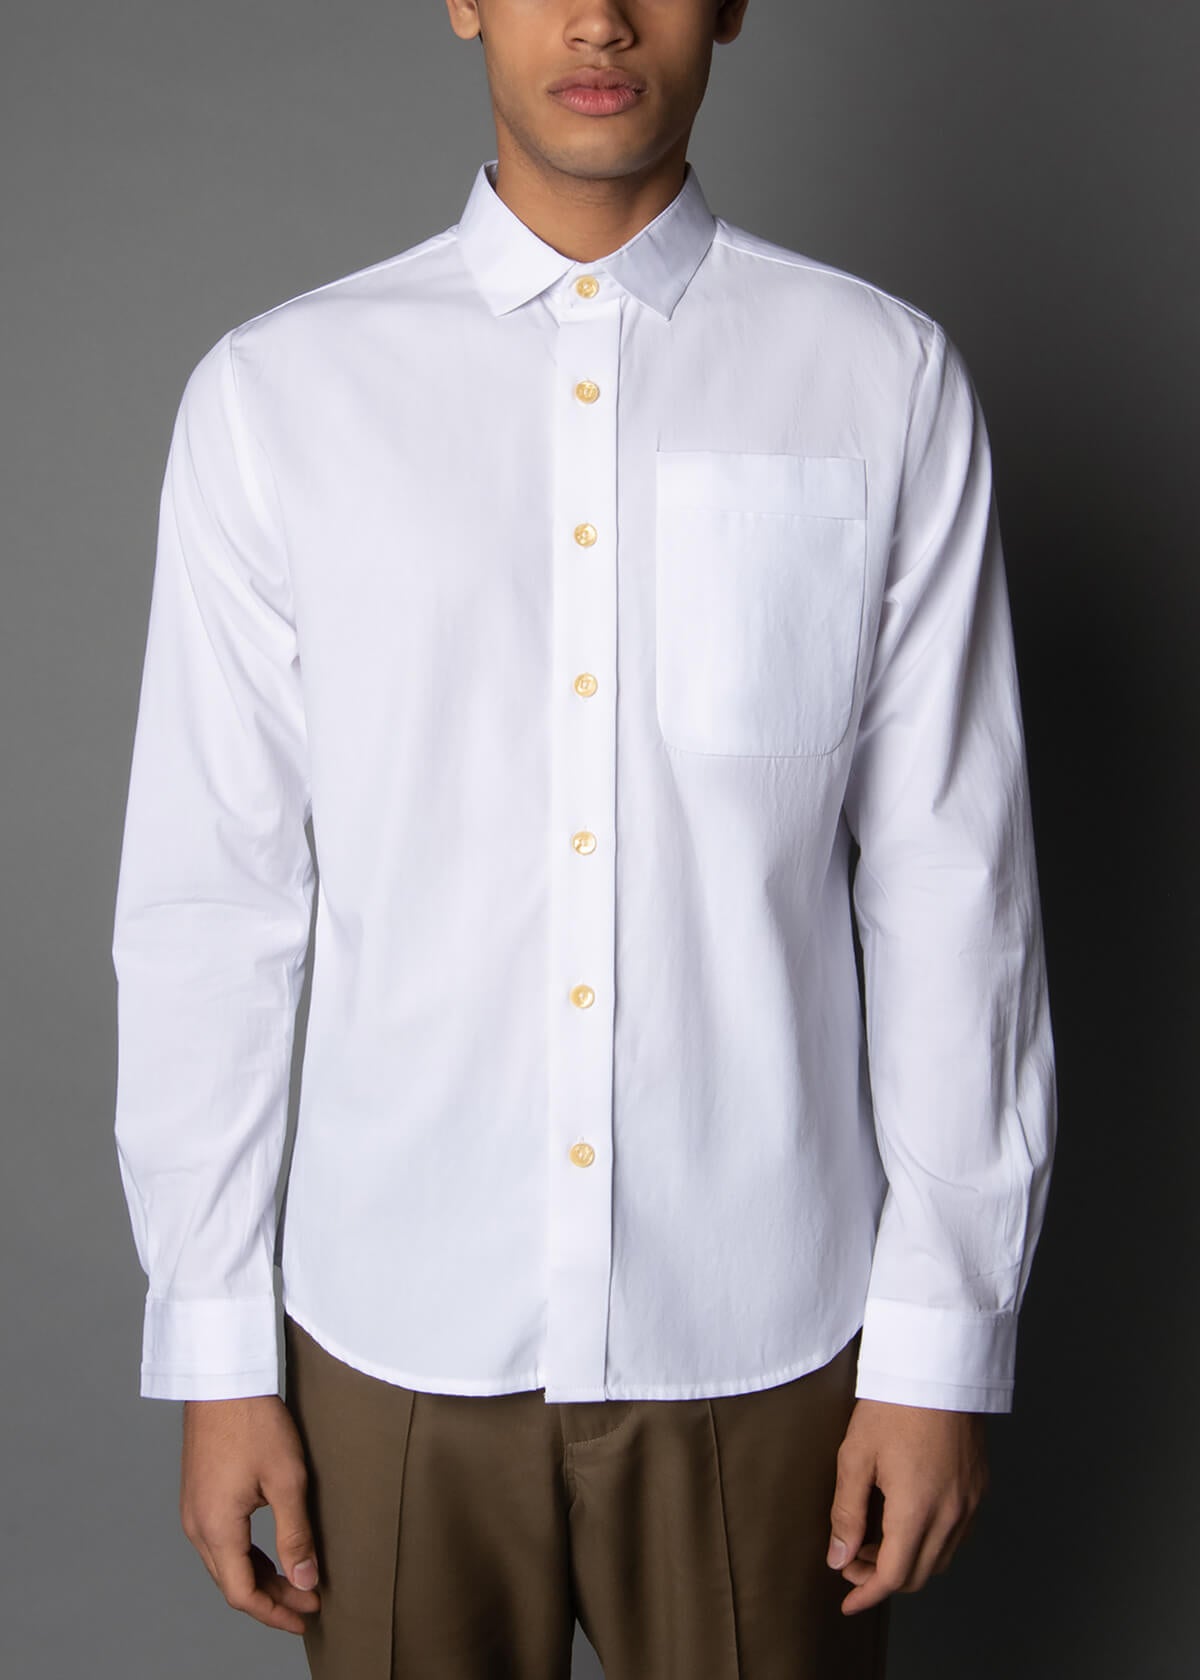 men's white shirt made from cotton and modal